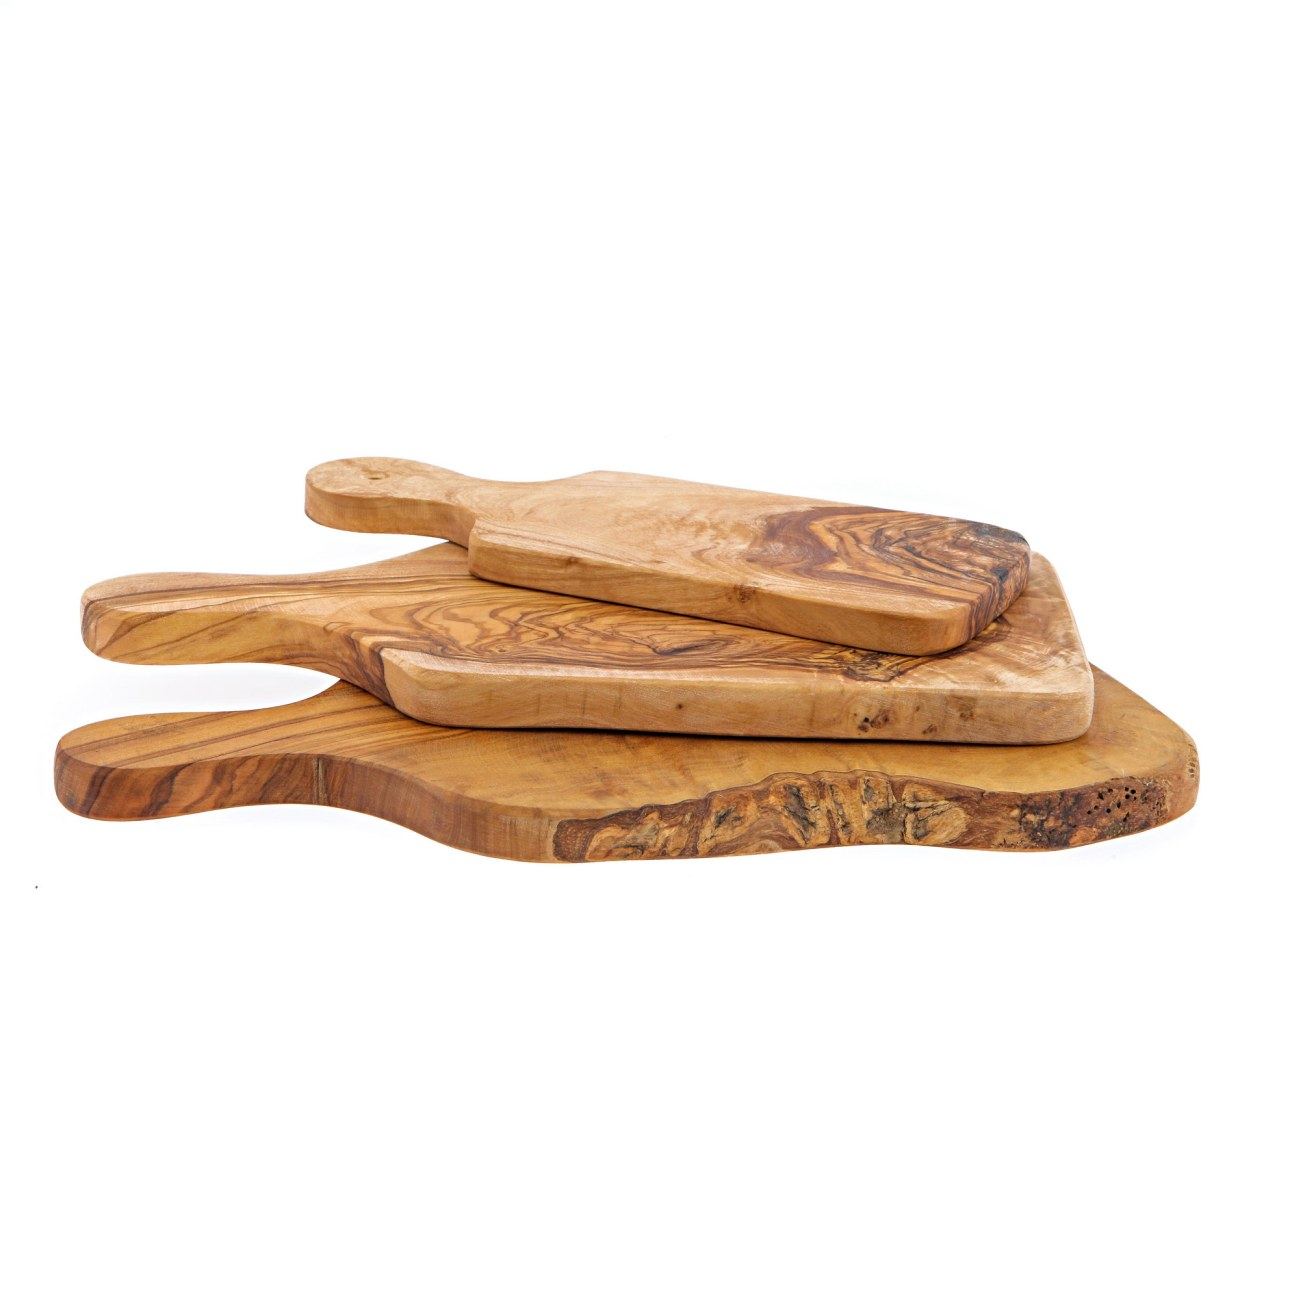 https://www.elitecrafters.com/image/cache/data/uploads/products/Olive_Wood_Cutting__Chopping_or_Serving_Board_Handmade_Set_of_3_Pieces_9-12_inches_Long_7-1300x1300.jpg